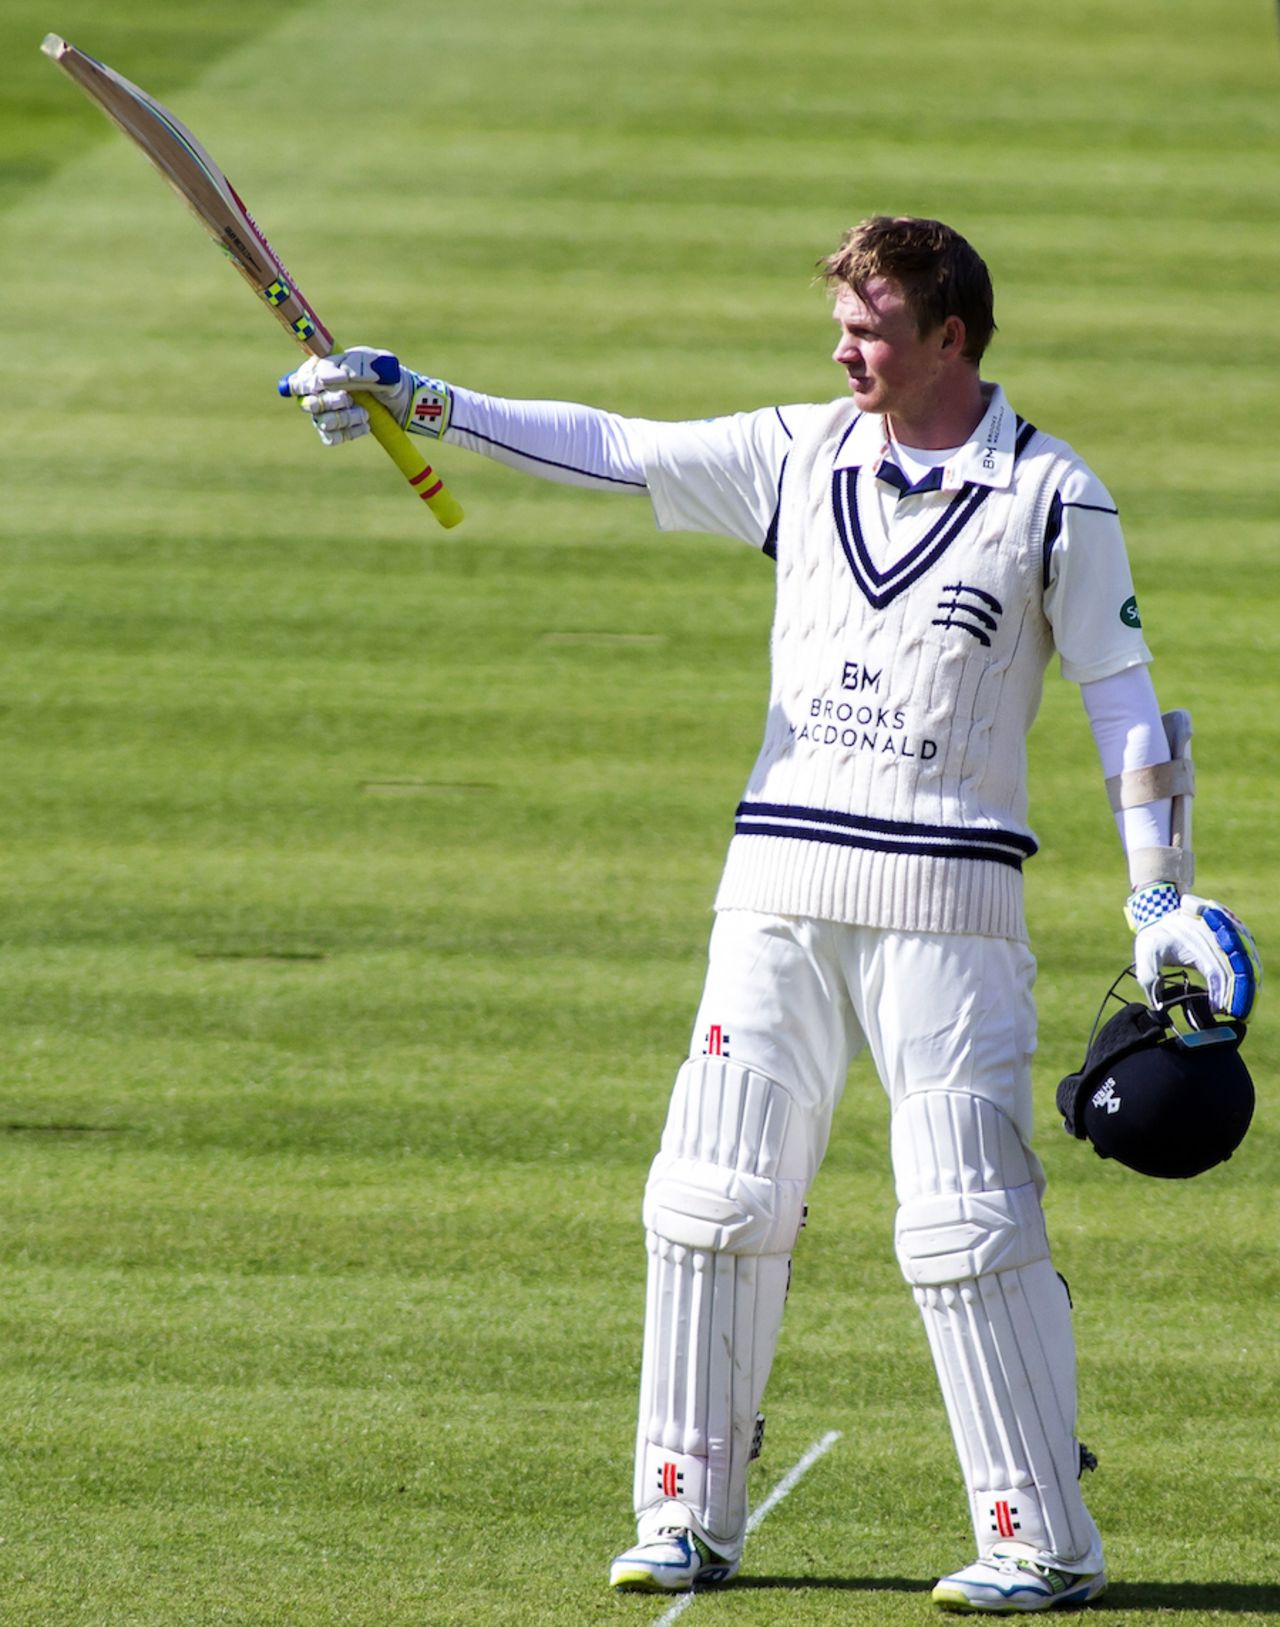 Sam Robson made a composed century, Middlesex v Warwickshire, Specsavers County Championship, Division One, Lord's, 1st day, April 17, 2016